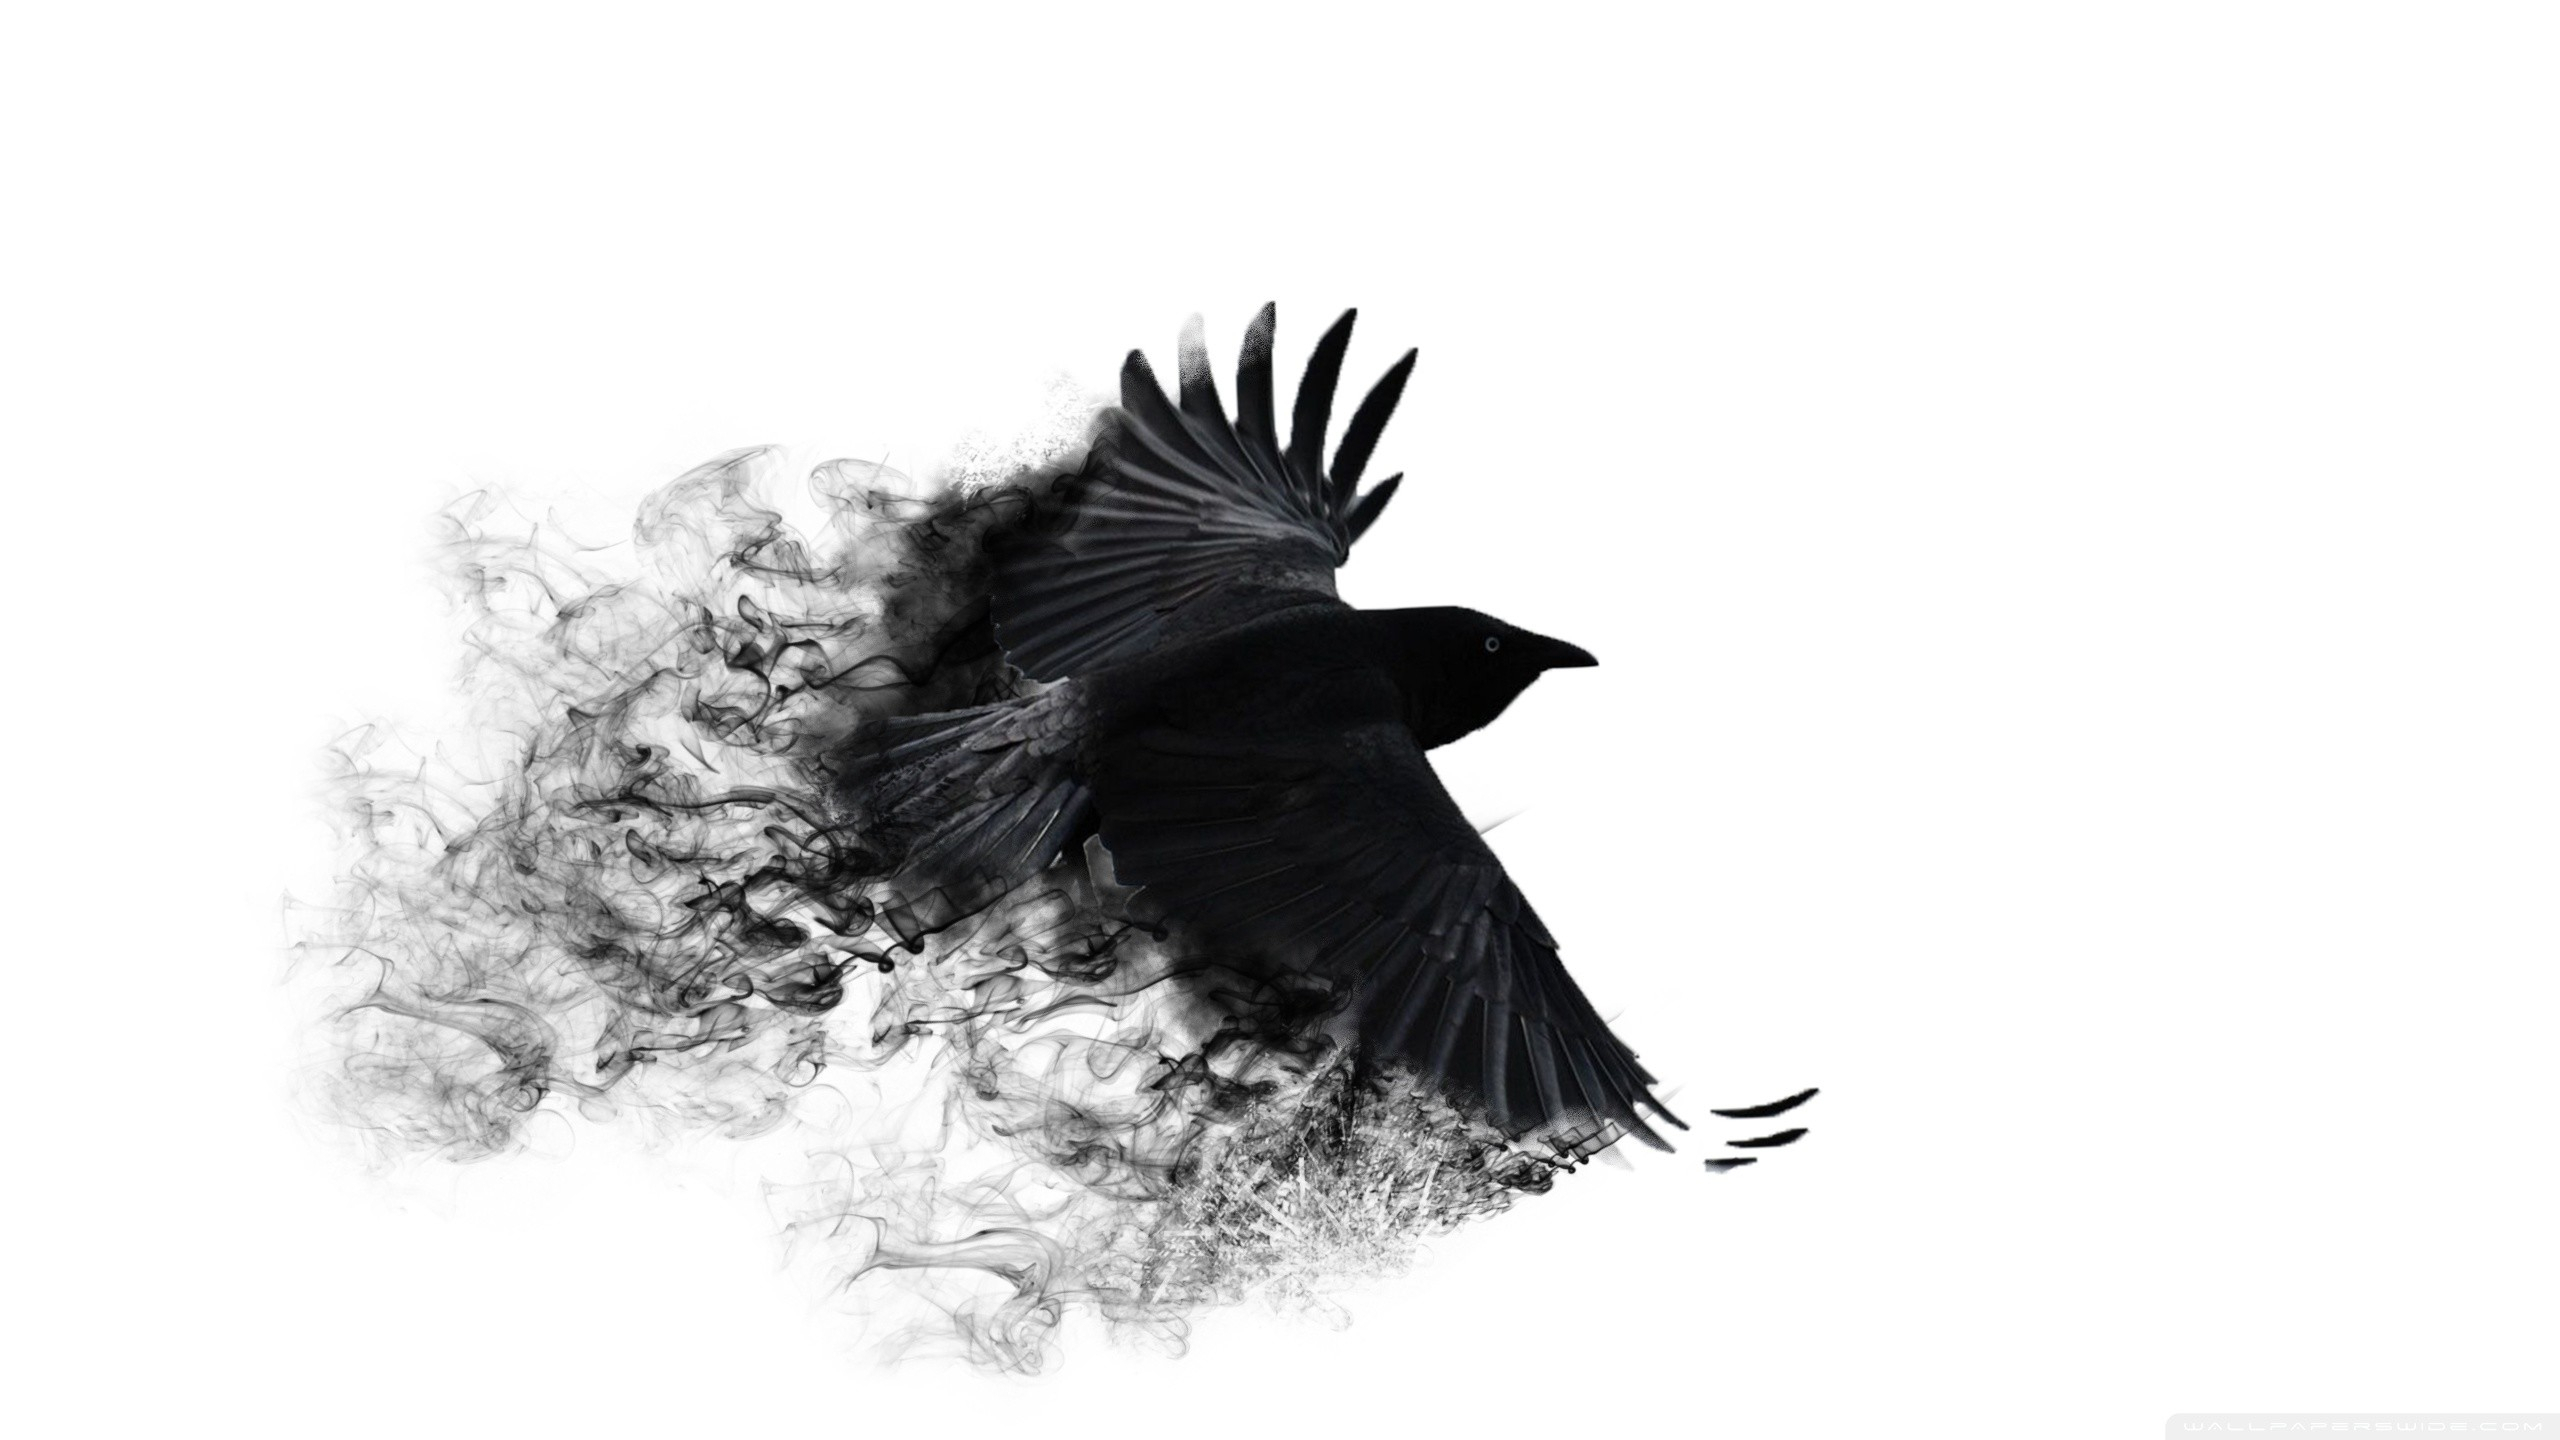 10 Top Black Crow Wallpaper FULL HD 1920×1080 For PC Background